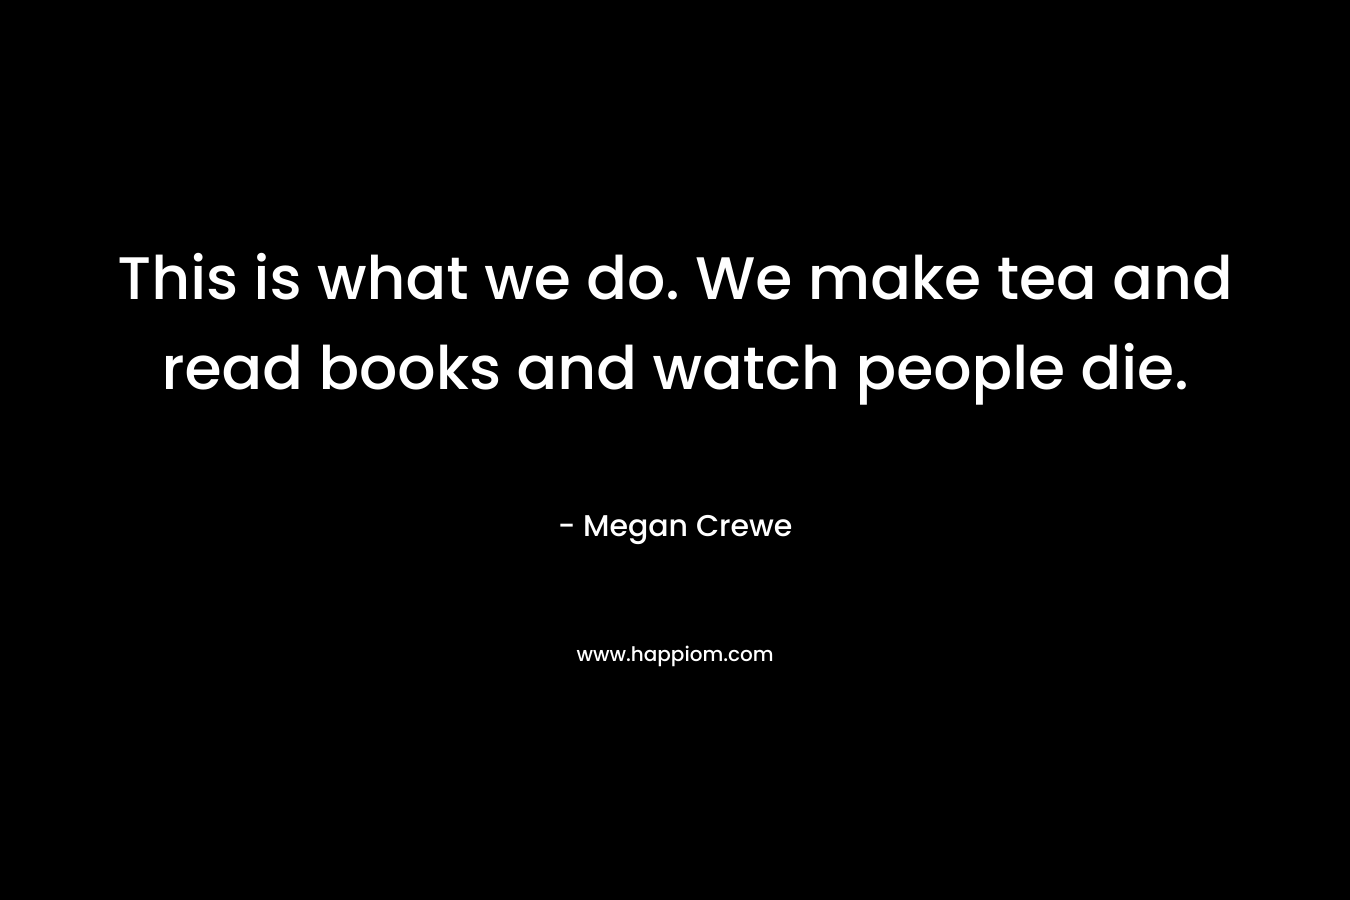 This is what we do. We make tea and read books and watch people die.